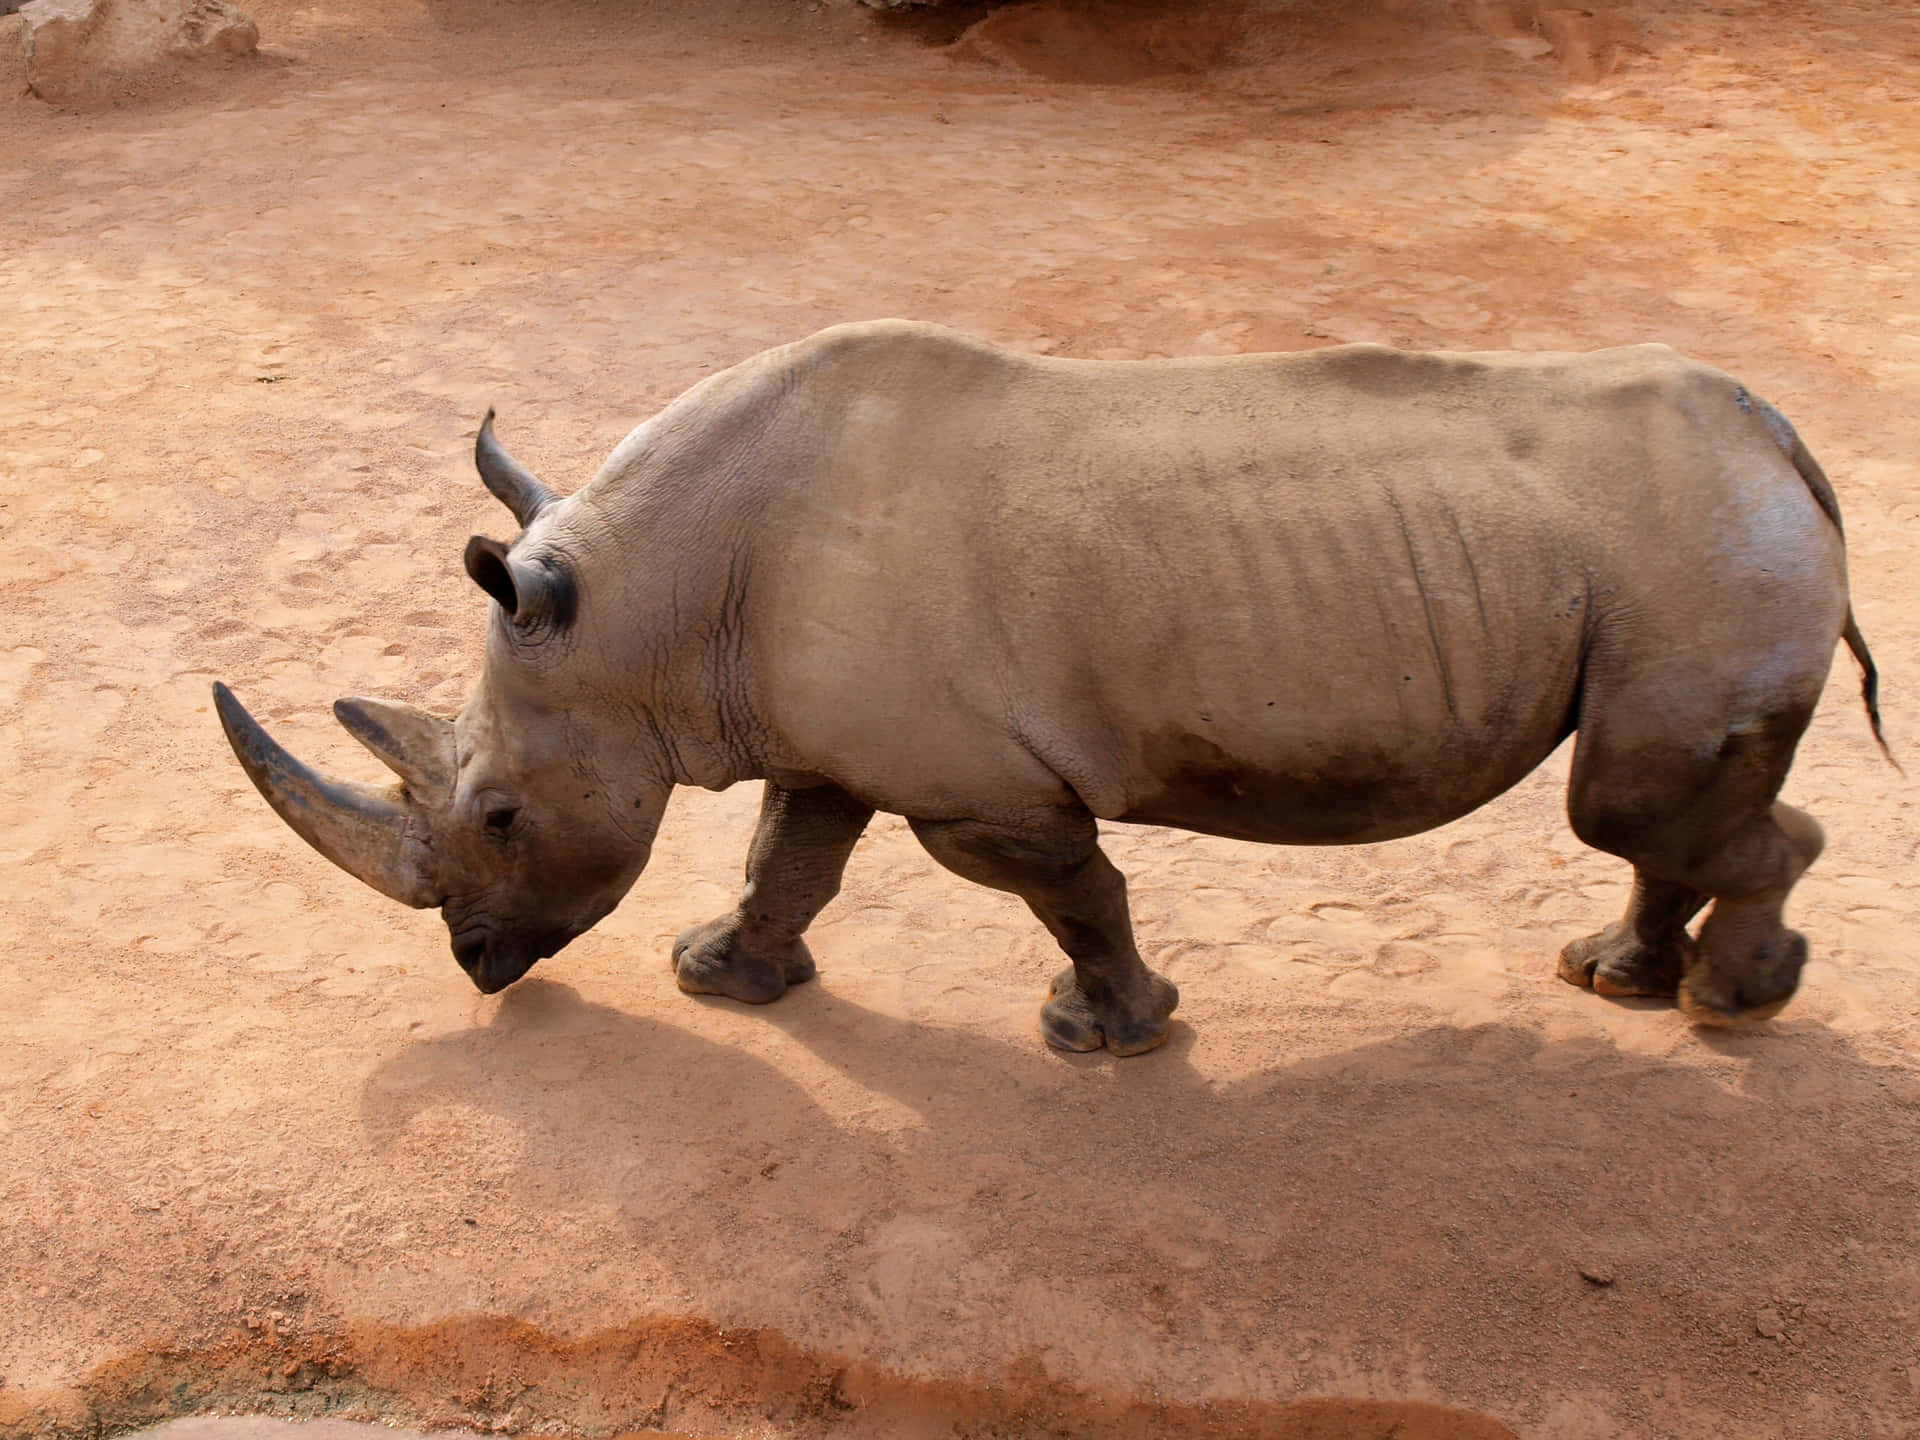 A giant Rhino roams across the savanna in search of food and water.